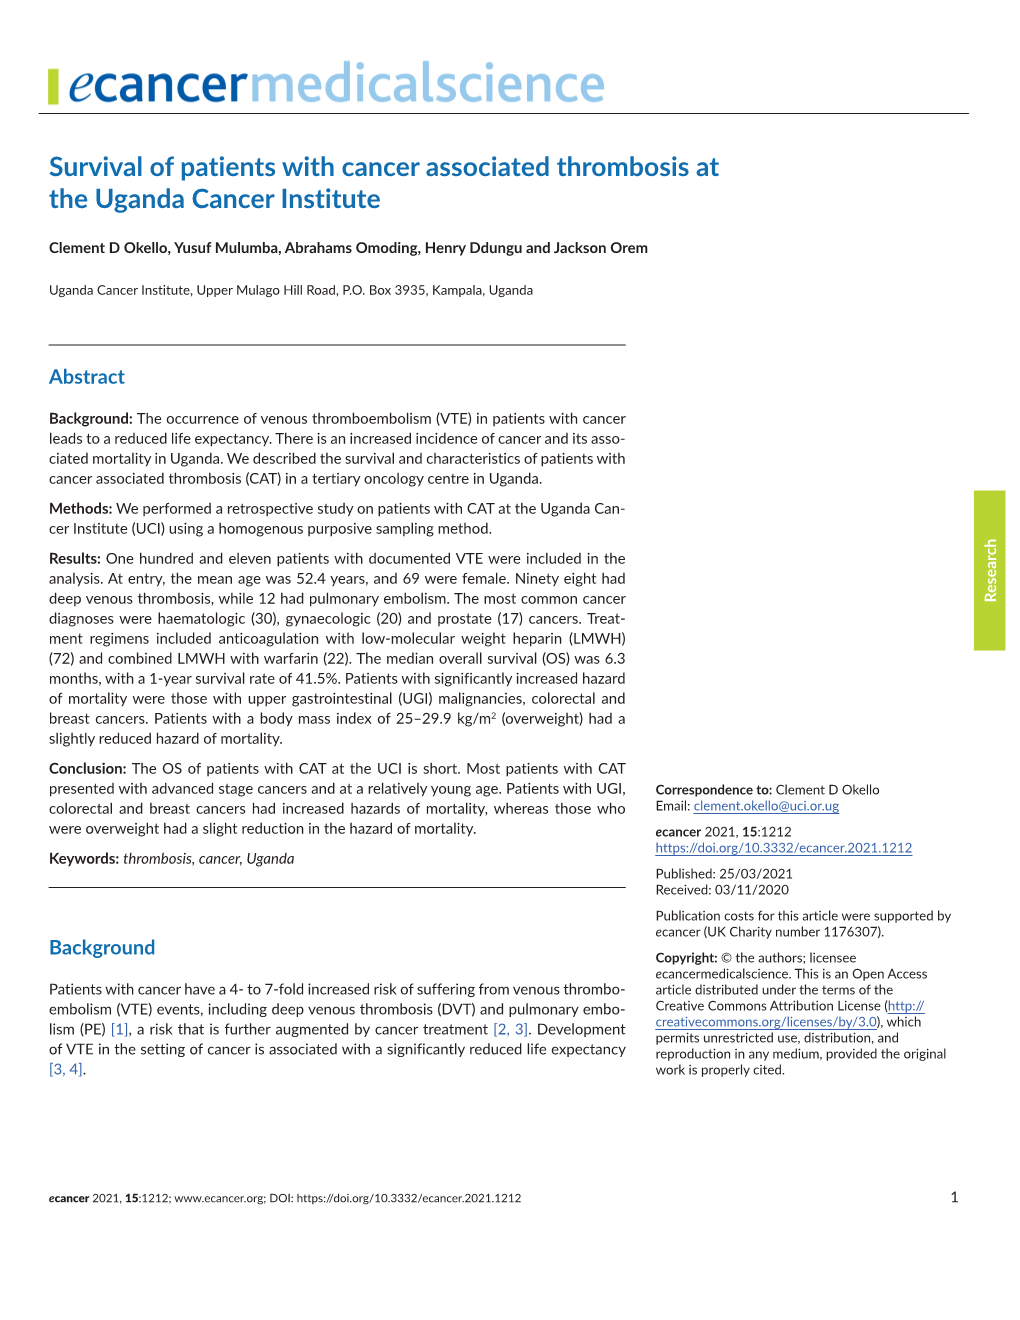 Survival of Patients with Cancer Associated Thrombosis at the Uganda Cancer Institute